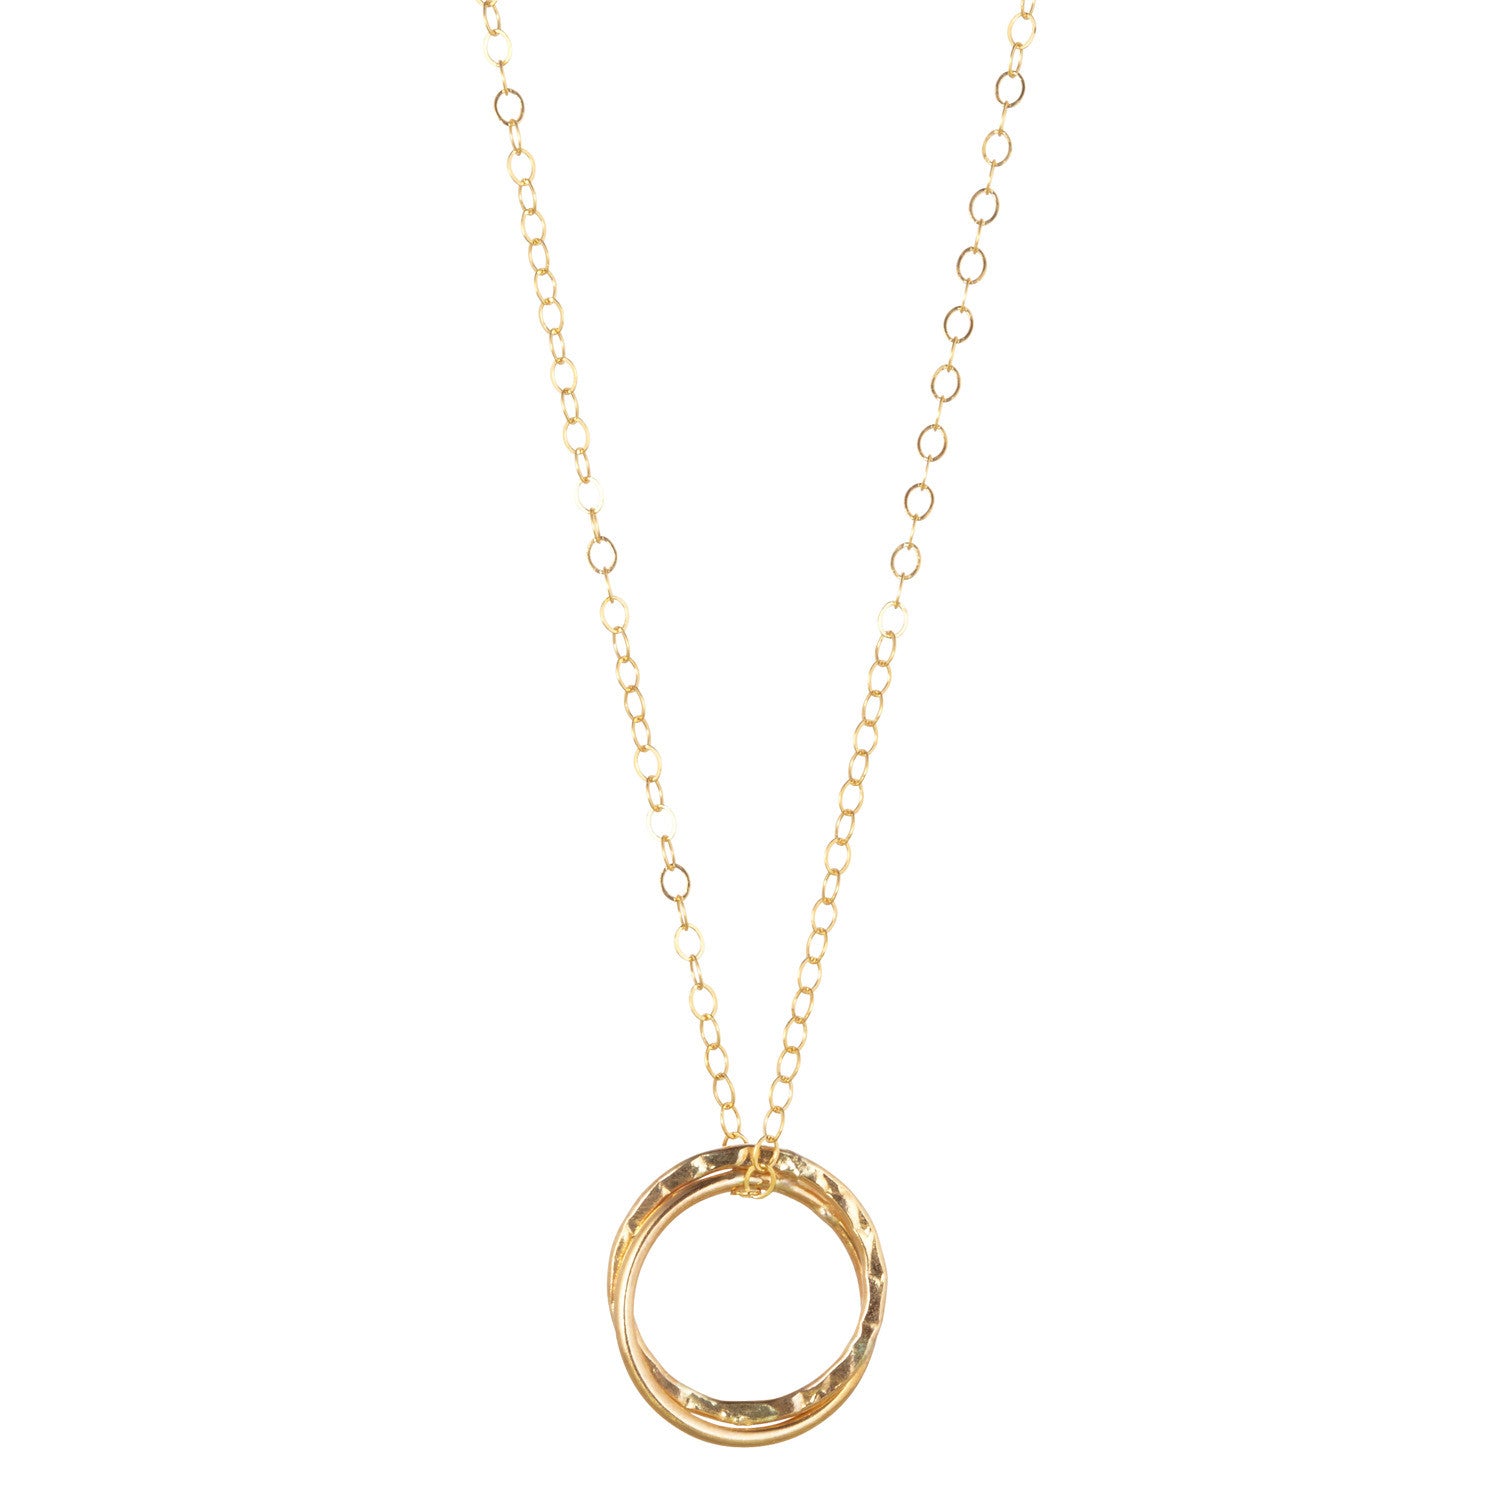 14kt Gold Filled Double Fused Circle Pendant - MoMuse Jewellery